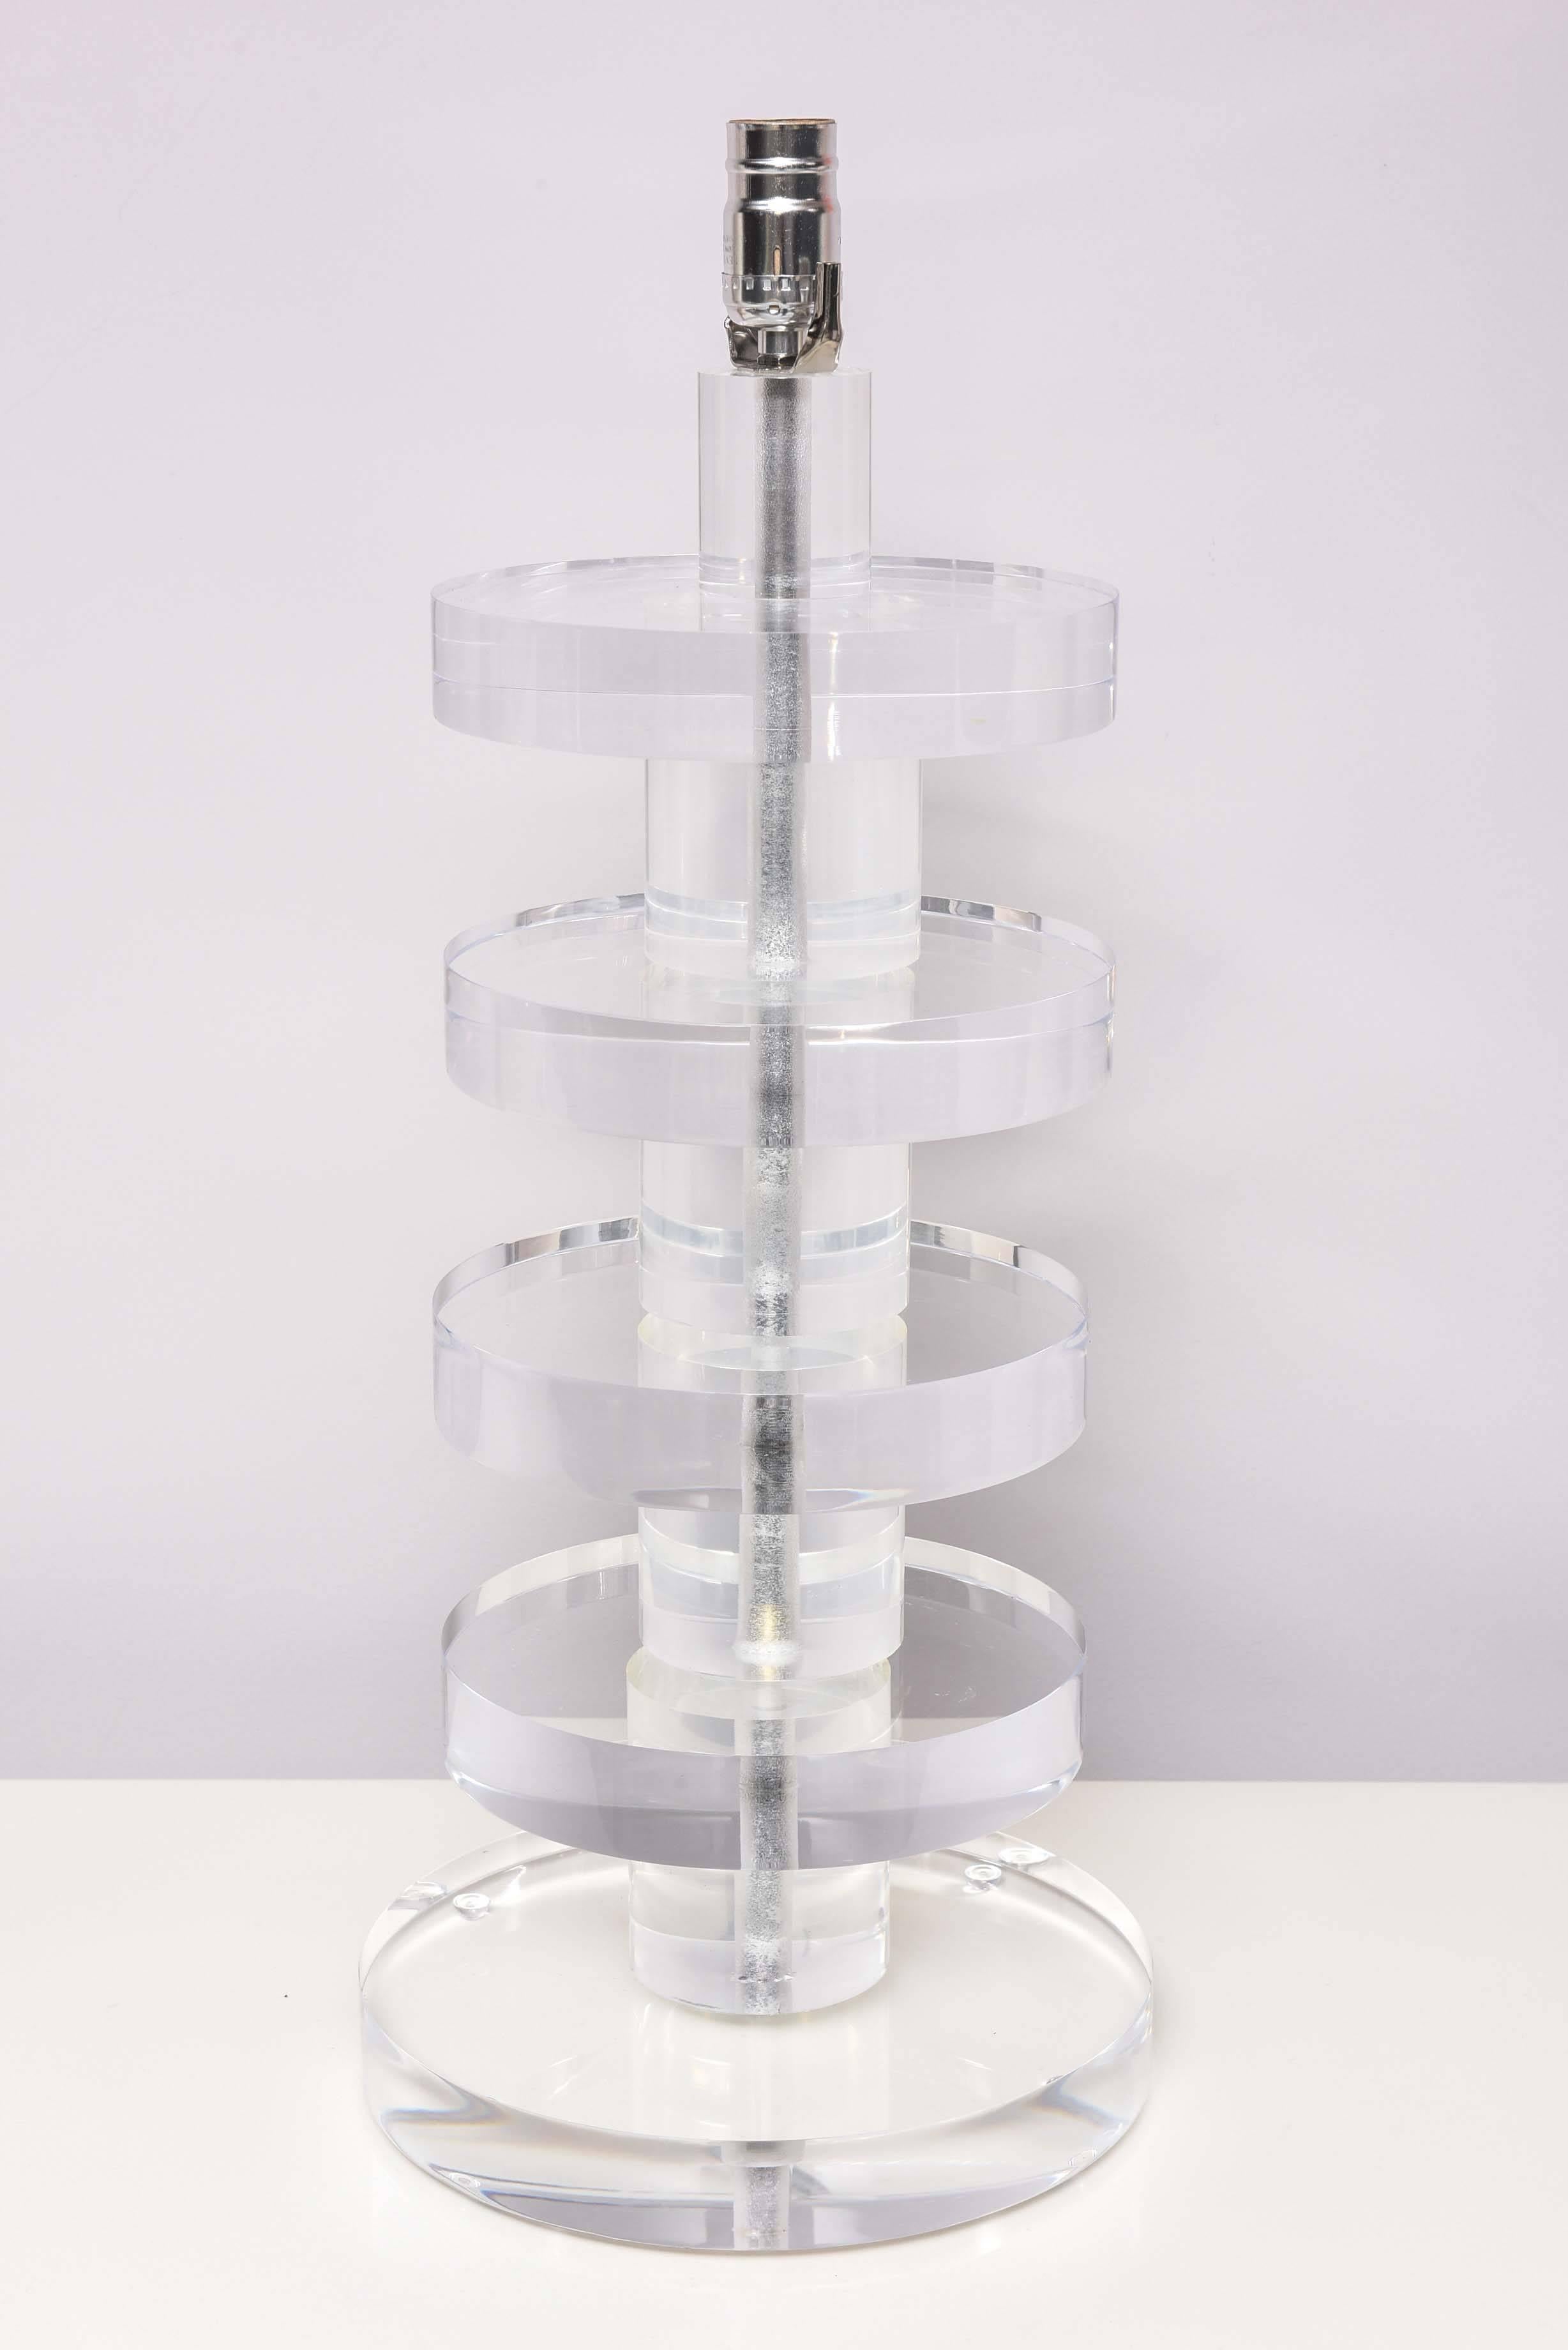 SALE! SALE!SALE! Karl Springer Style, Huge Lucite Lamps, Vintage, Chunky Lucite In Excellent Condition For Sale In Miami, Miami Design District, FL